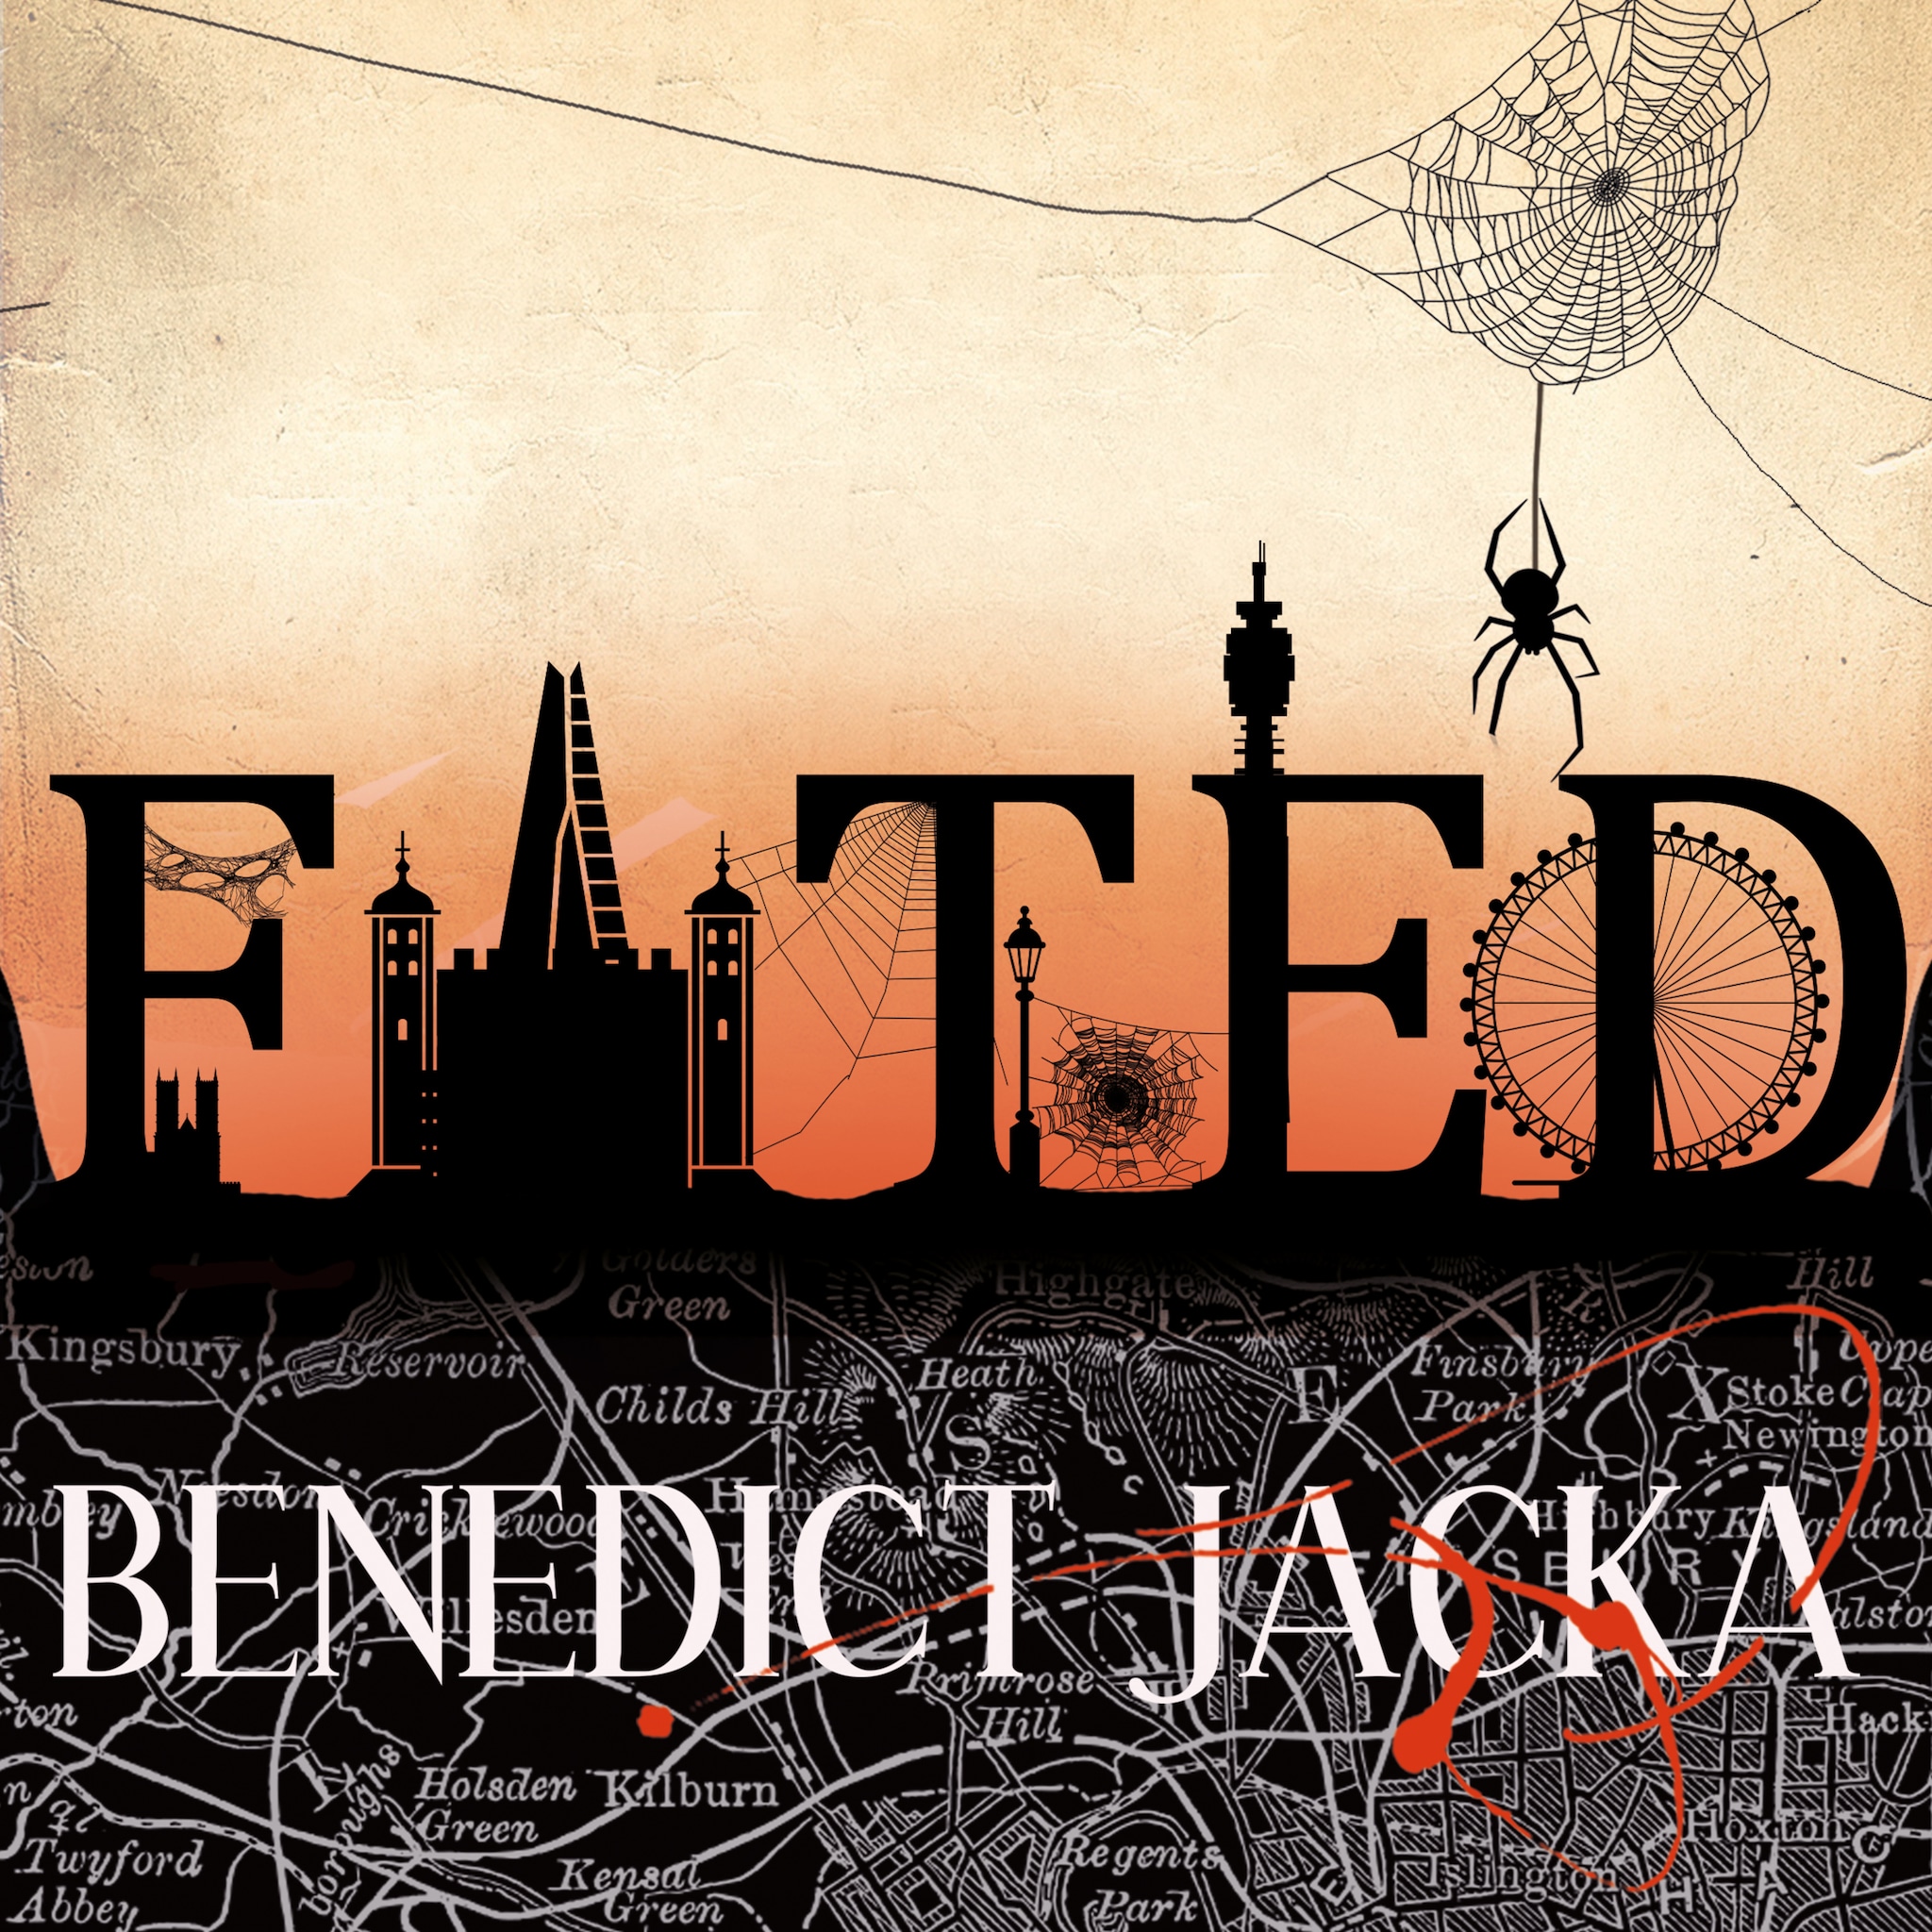 fated by benedict jacka